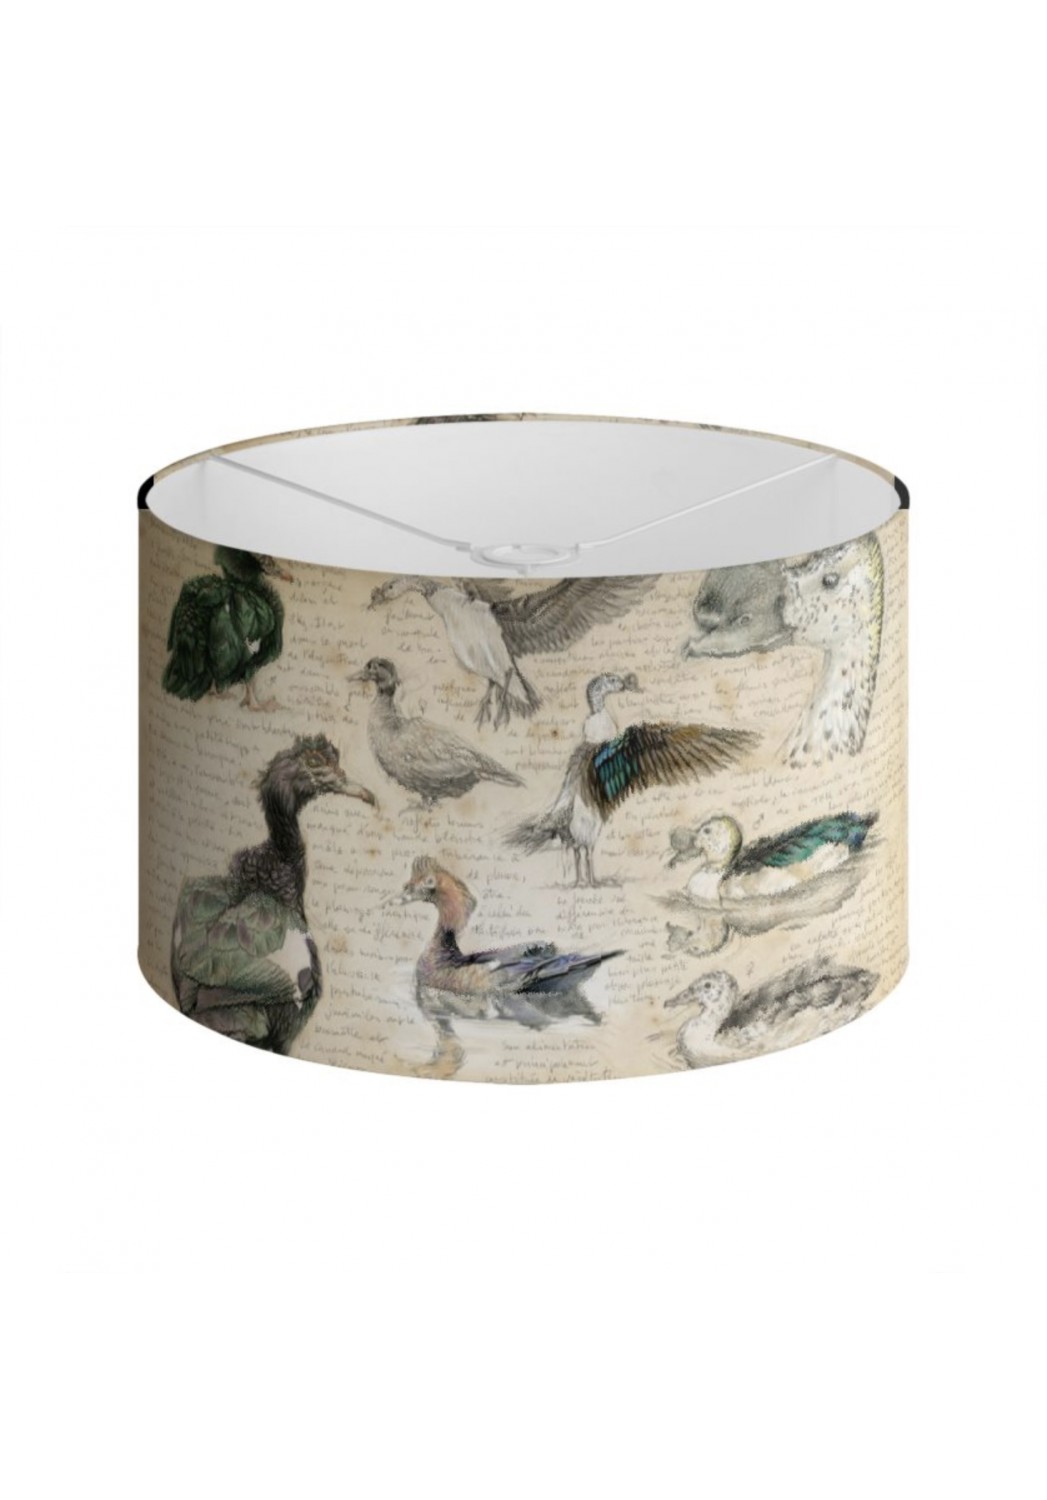 Marcello-art: Decoration accessoiries Lampshade 238 Muscovy Duck & Knob-billed Duck